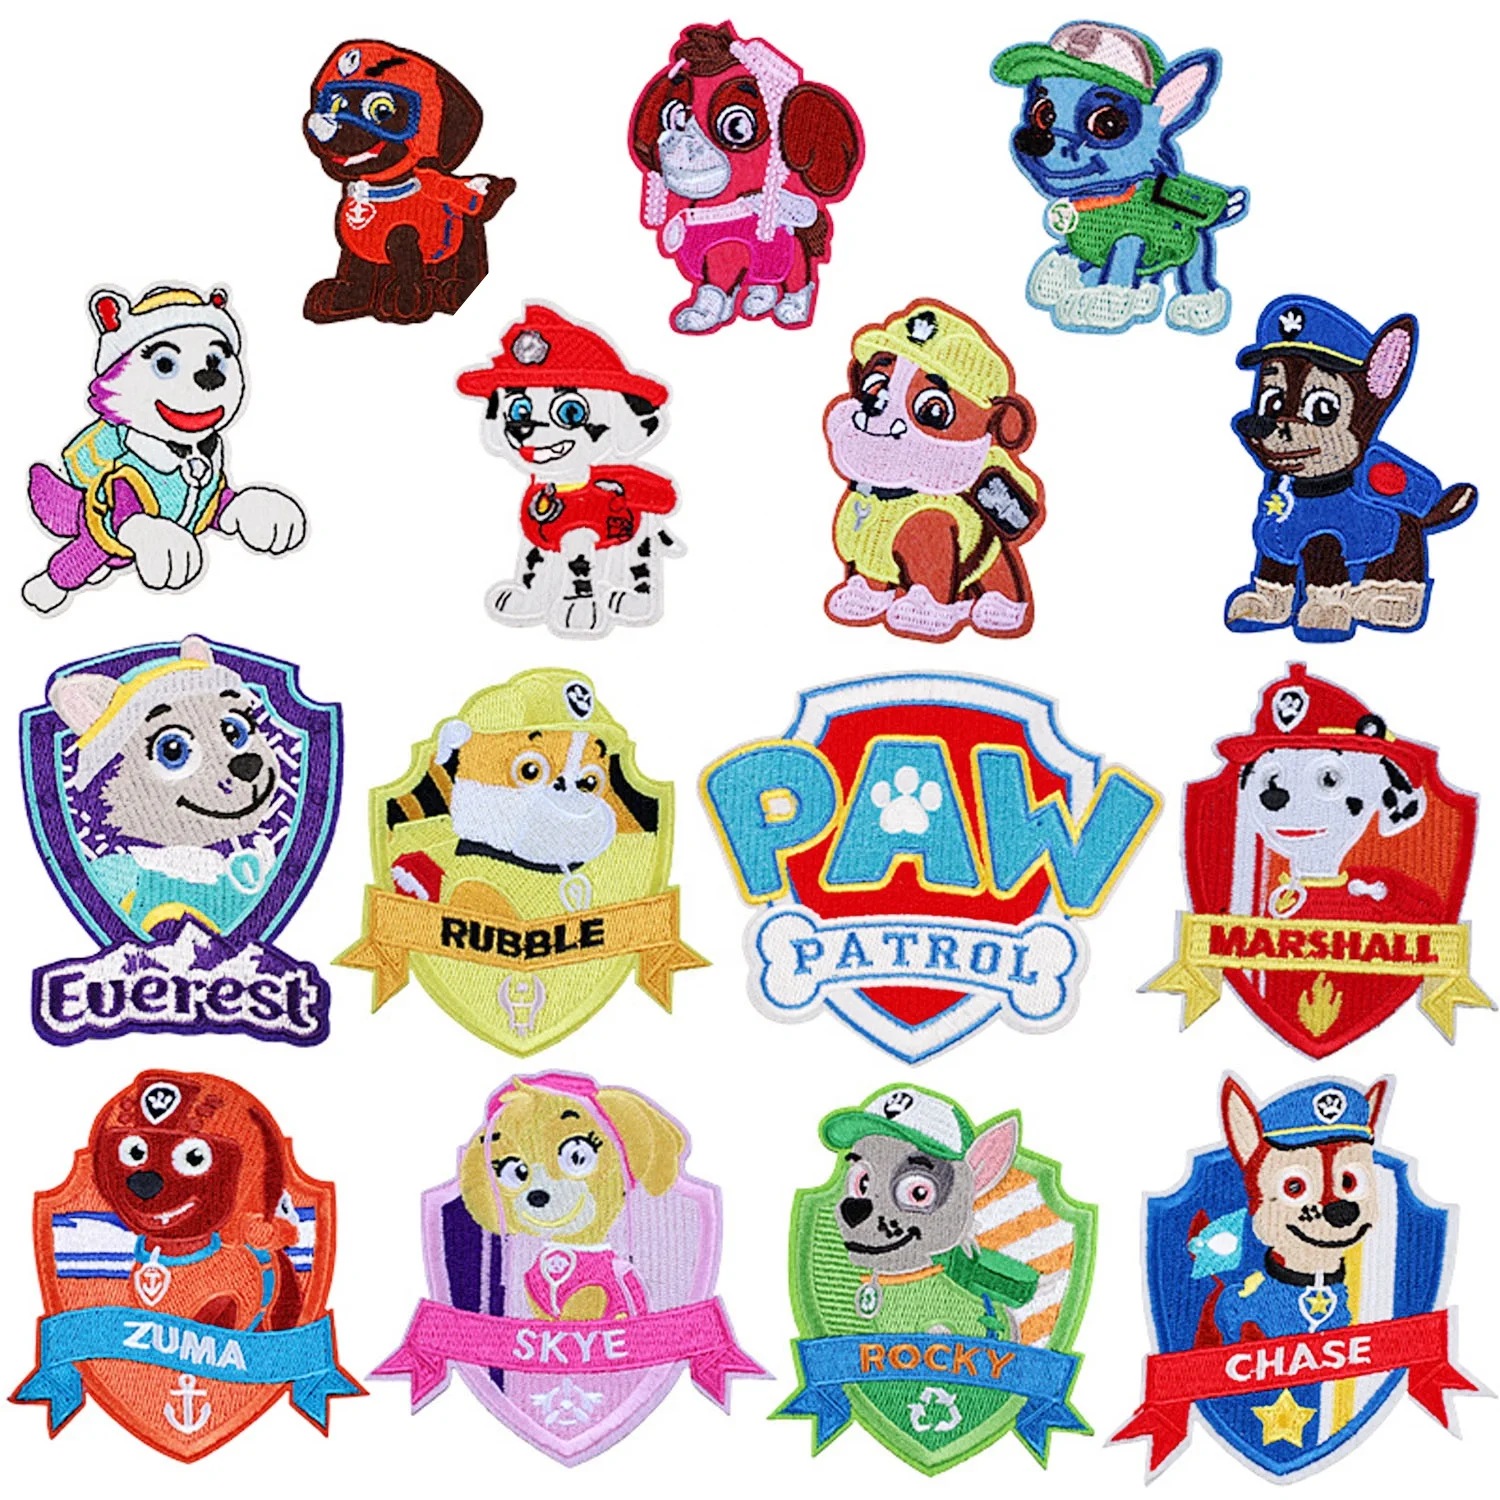 

Dogs WANGWANG Groups Motif PawPatrol Sew On/Iron On Applique Kids Embroidered Decoration Patches for Children Jeans Clothing